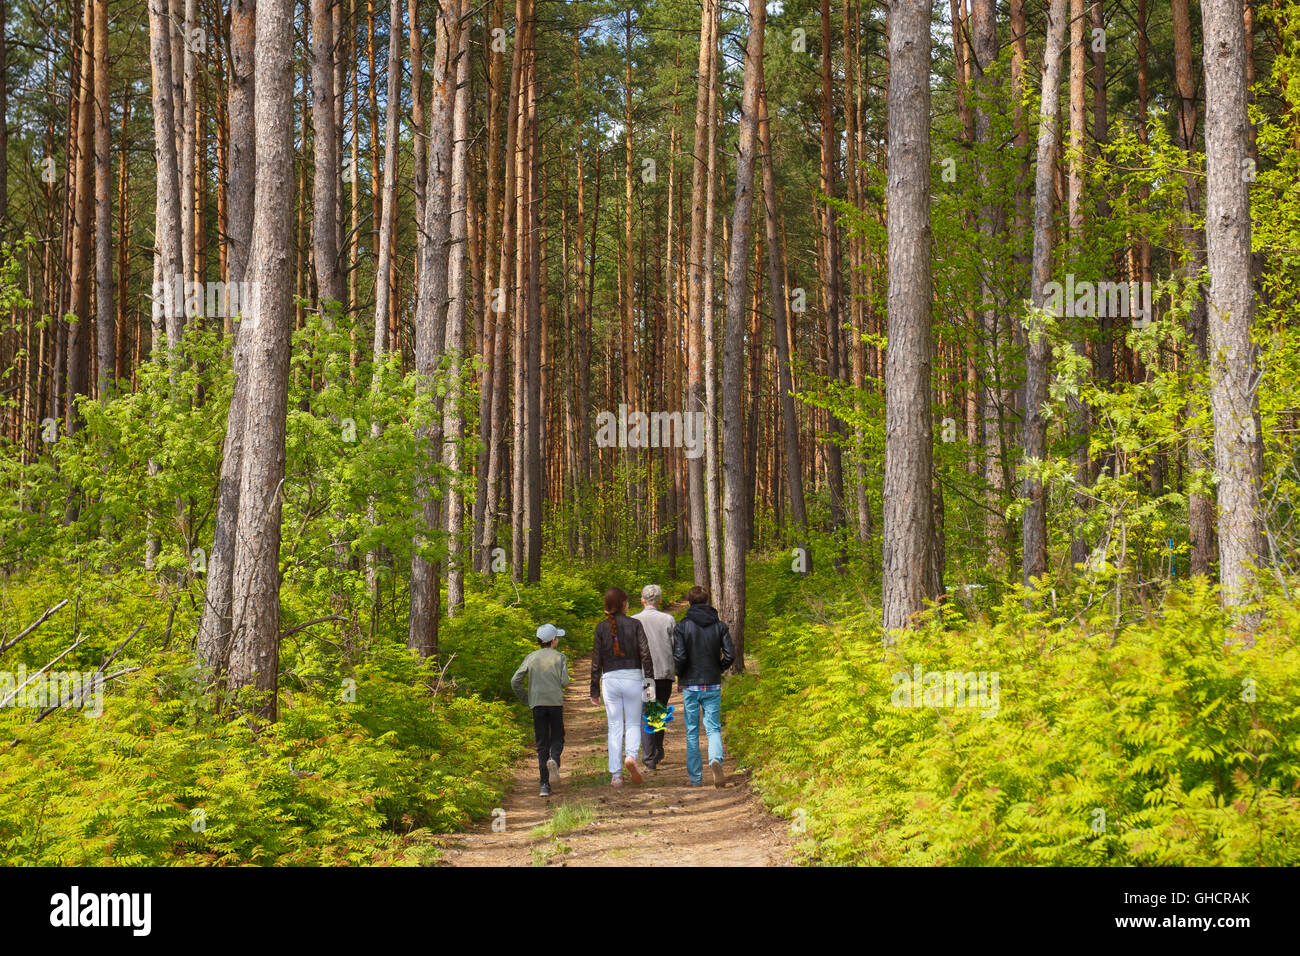 Back View Of Mixed Ages Group Of Four People Foursome Walking On Forest Road Deep In Spring Summer Pinewood To The Pinery Gravey Stock Photo